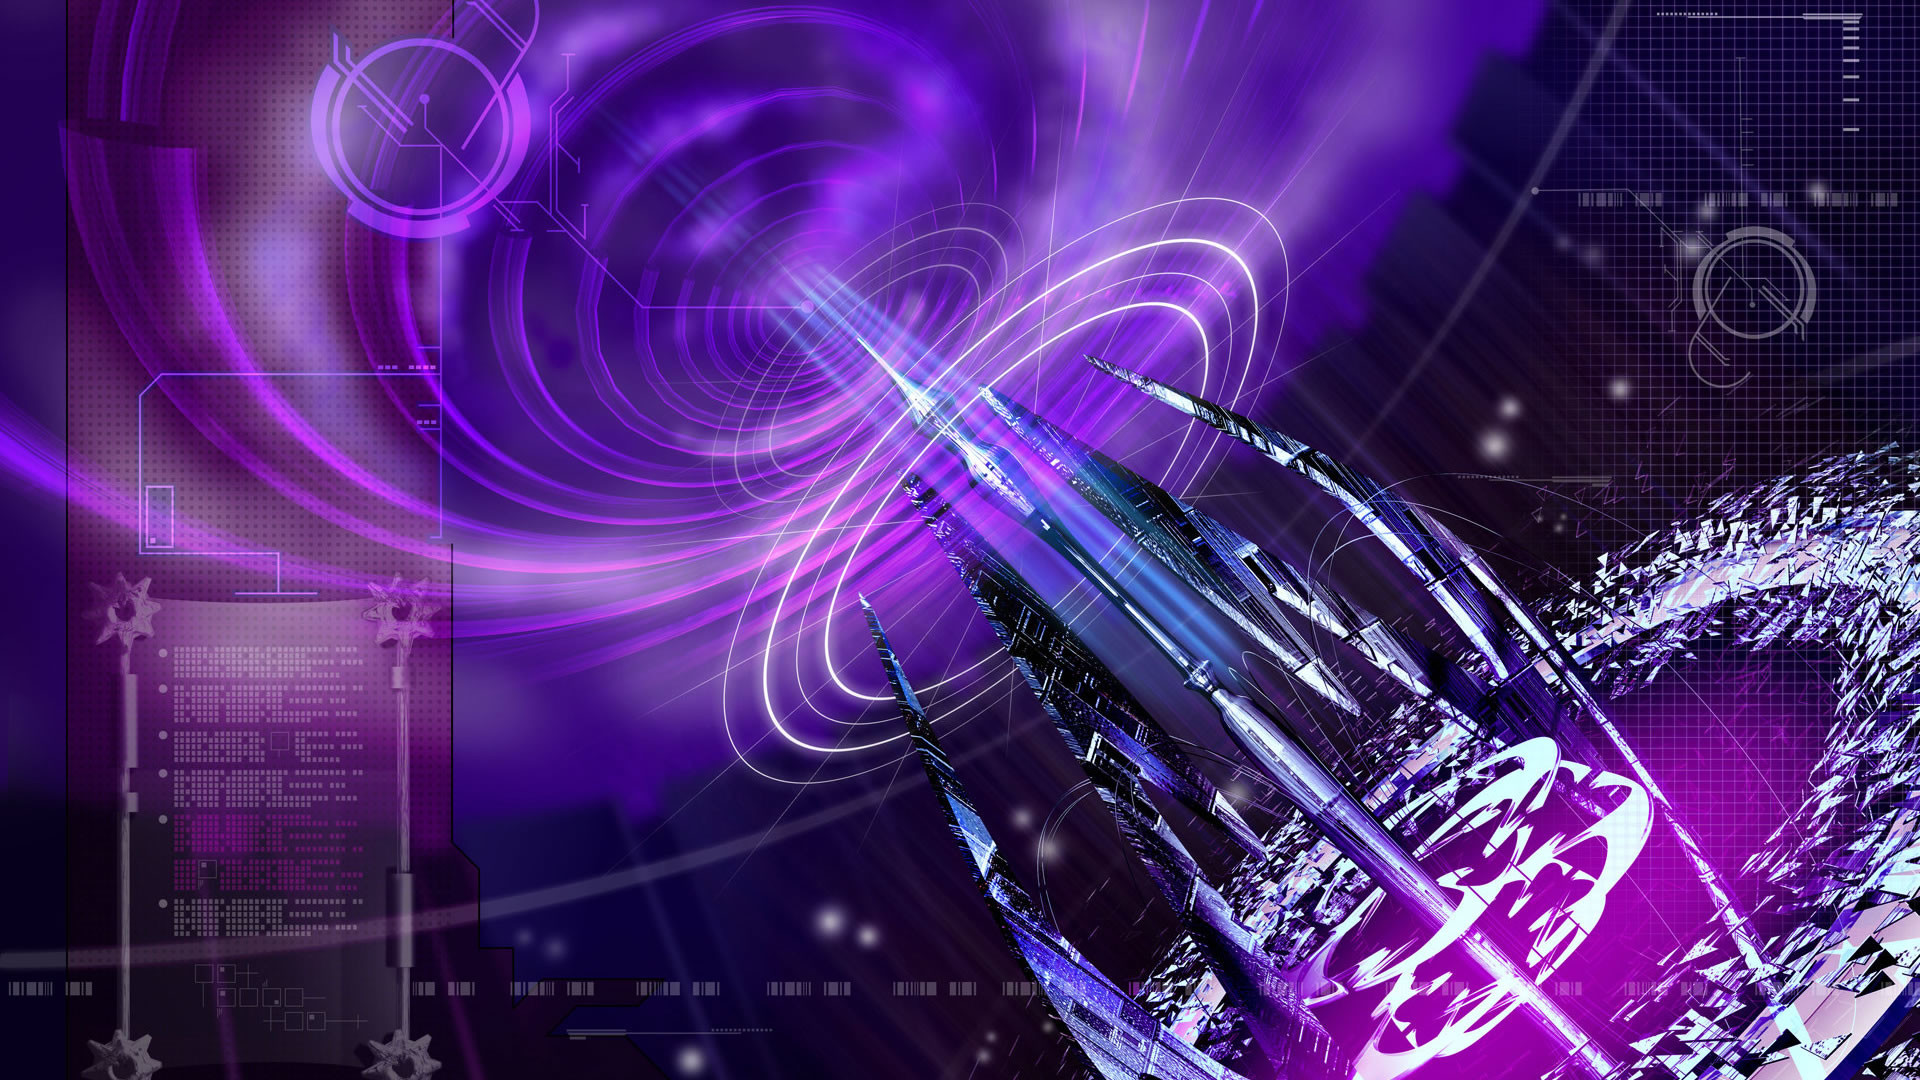 1920x1080 Abstract wallpapers purple rain wallpaper raindrops backgrounds .